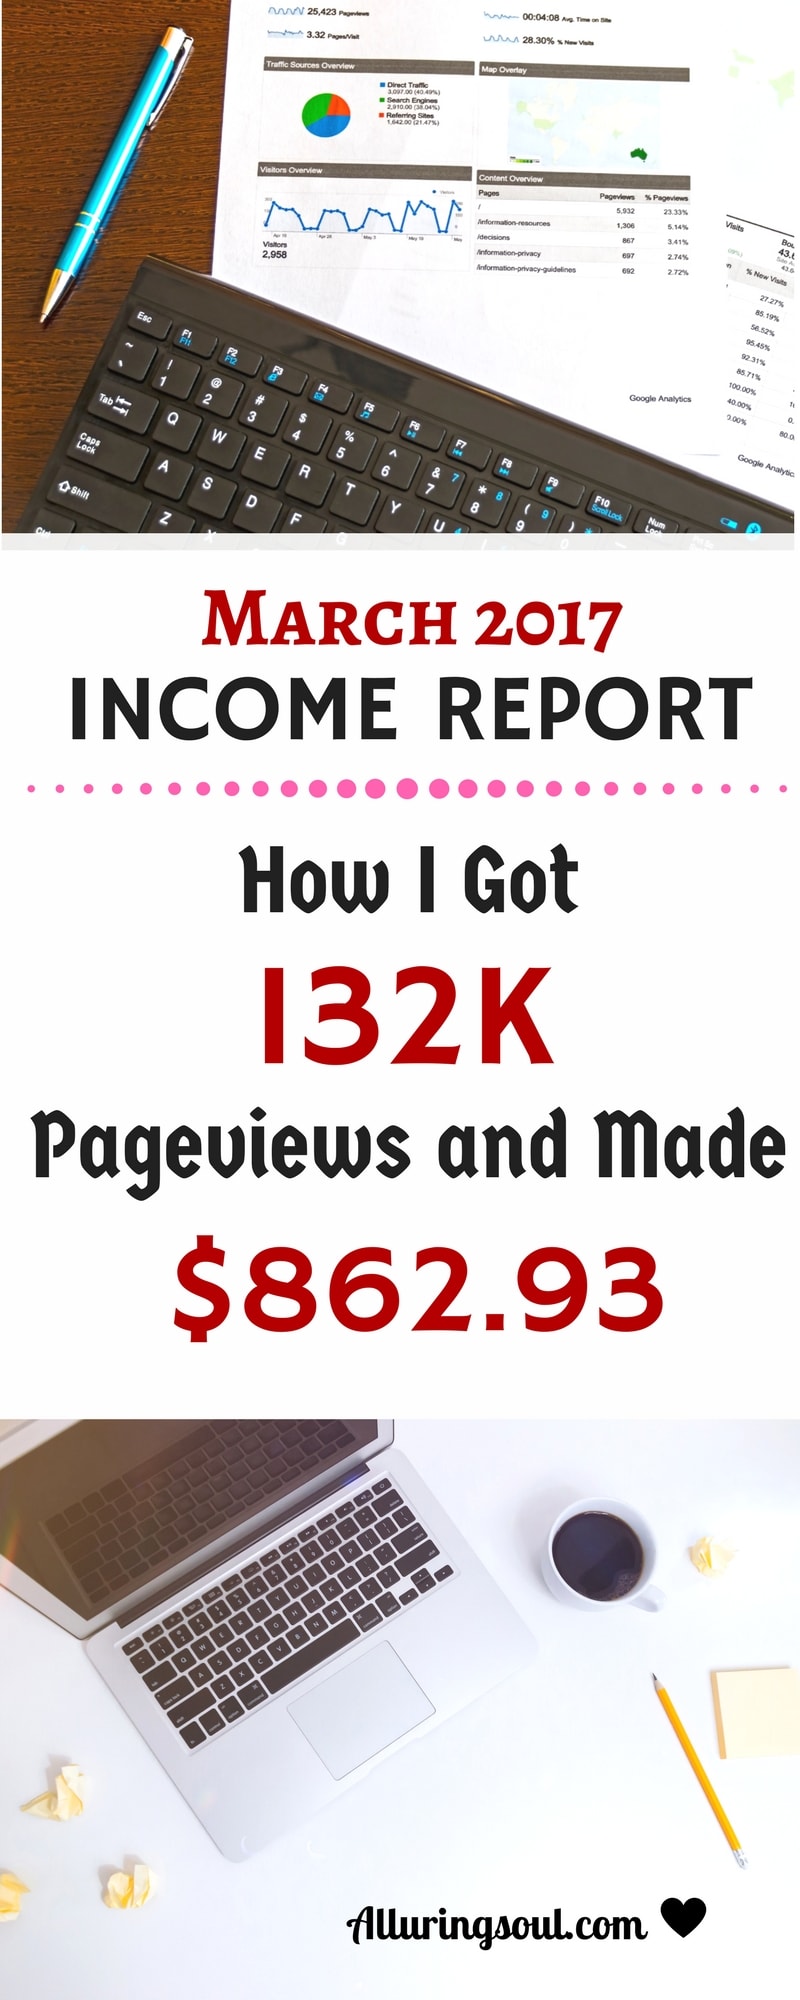 income-report-march-2017-infographic